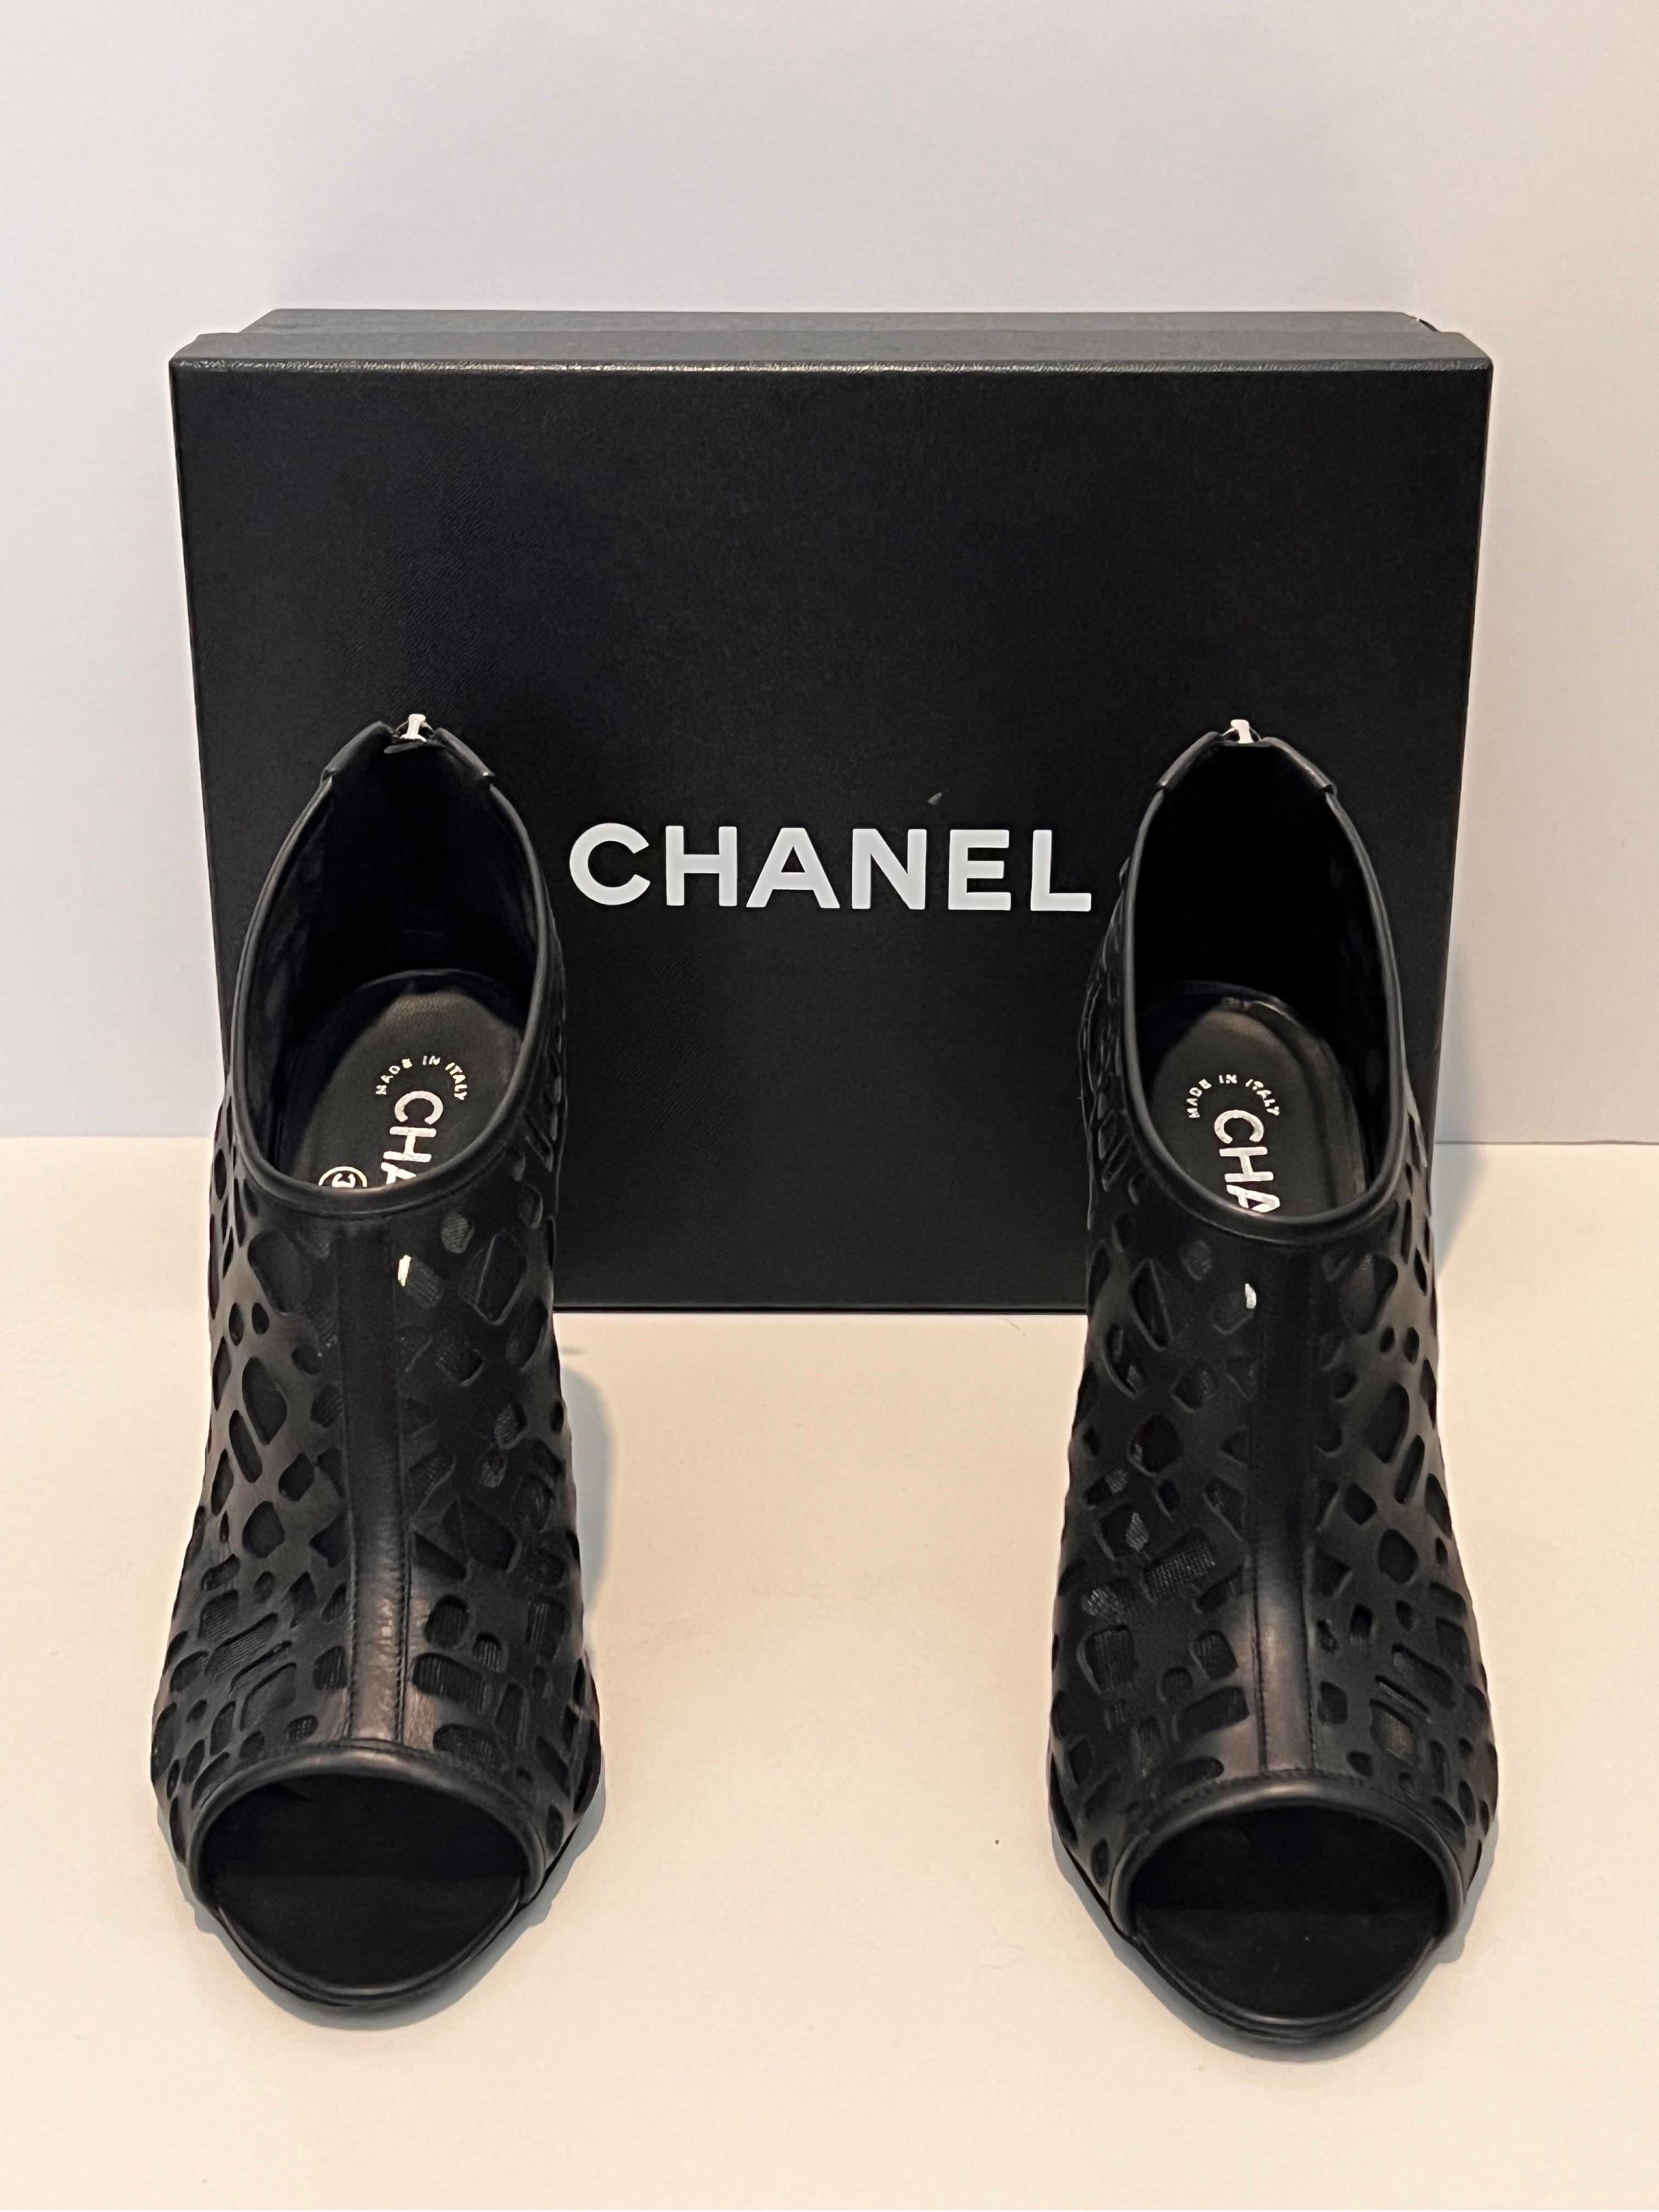 Amazing and sexy CHANEL  black booties. in laser-cut leather and mesh.  Size 38.5. Good condition with wear on the soles. ask for photos.

comes with original box and shoe bags. 

 